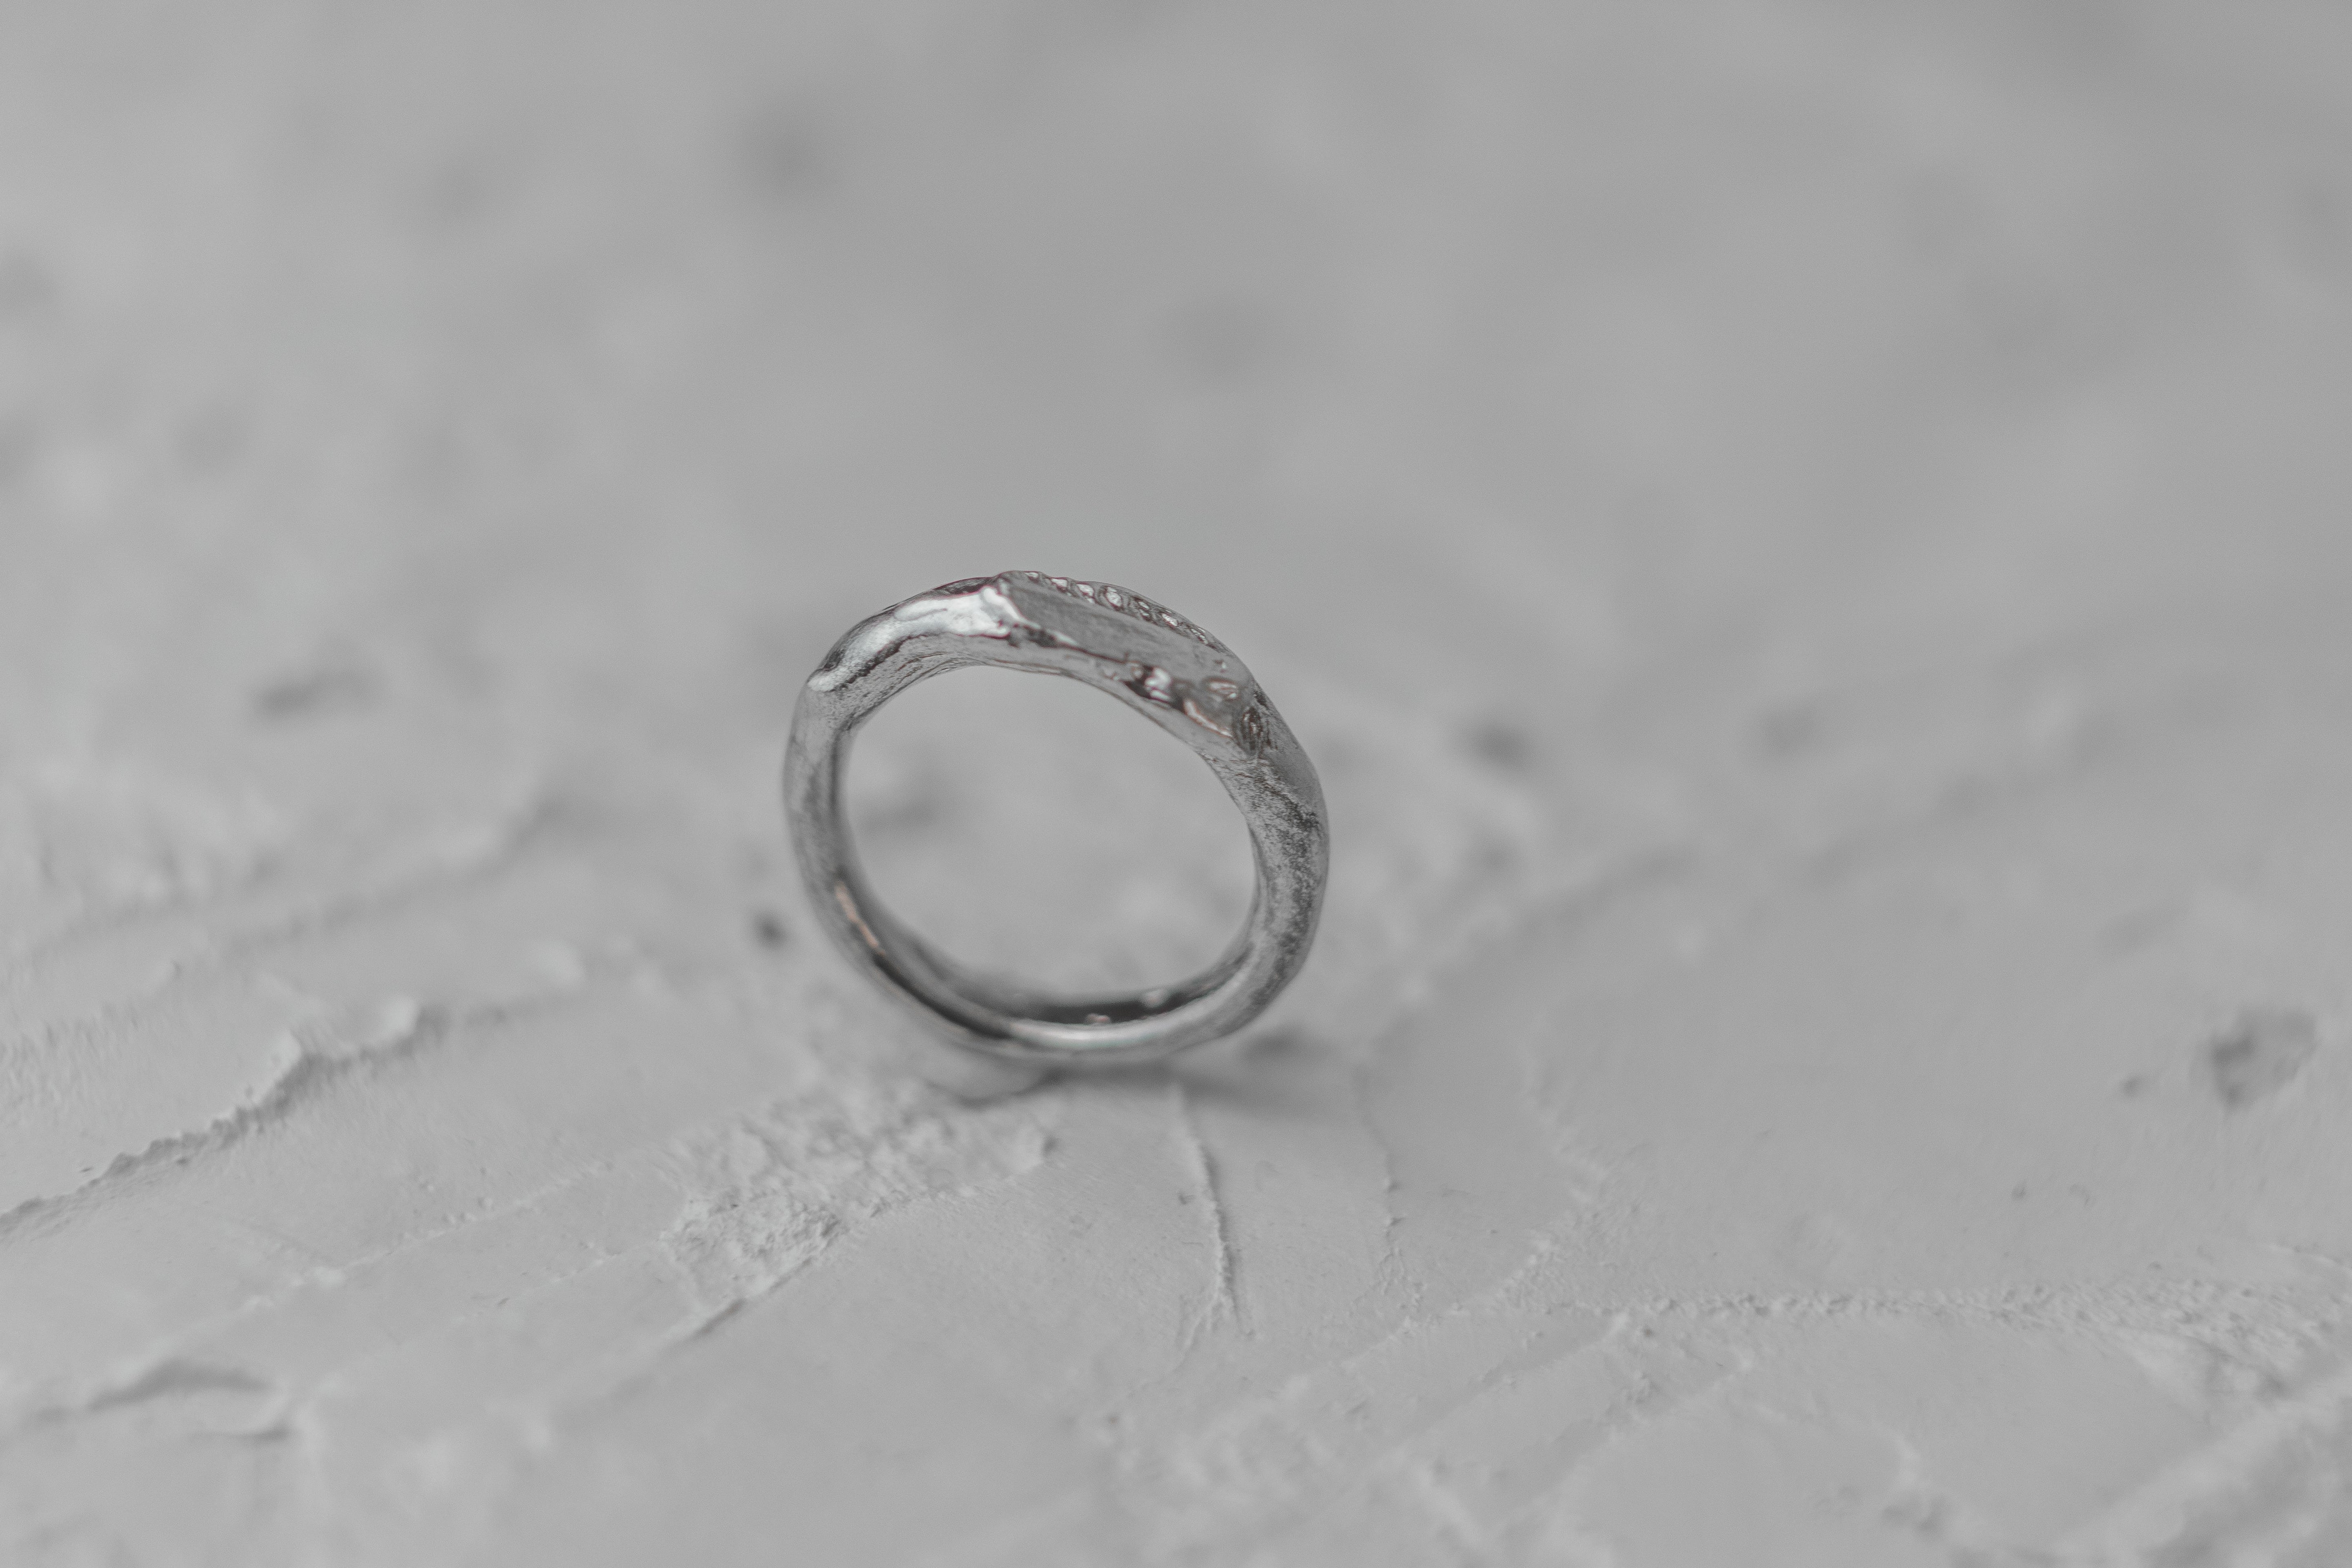 One-of-a-kind relief ring